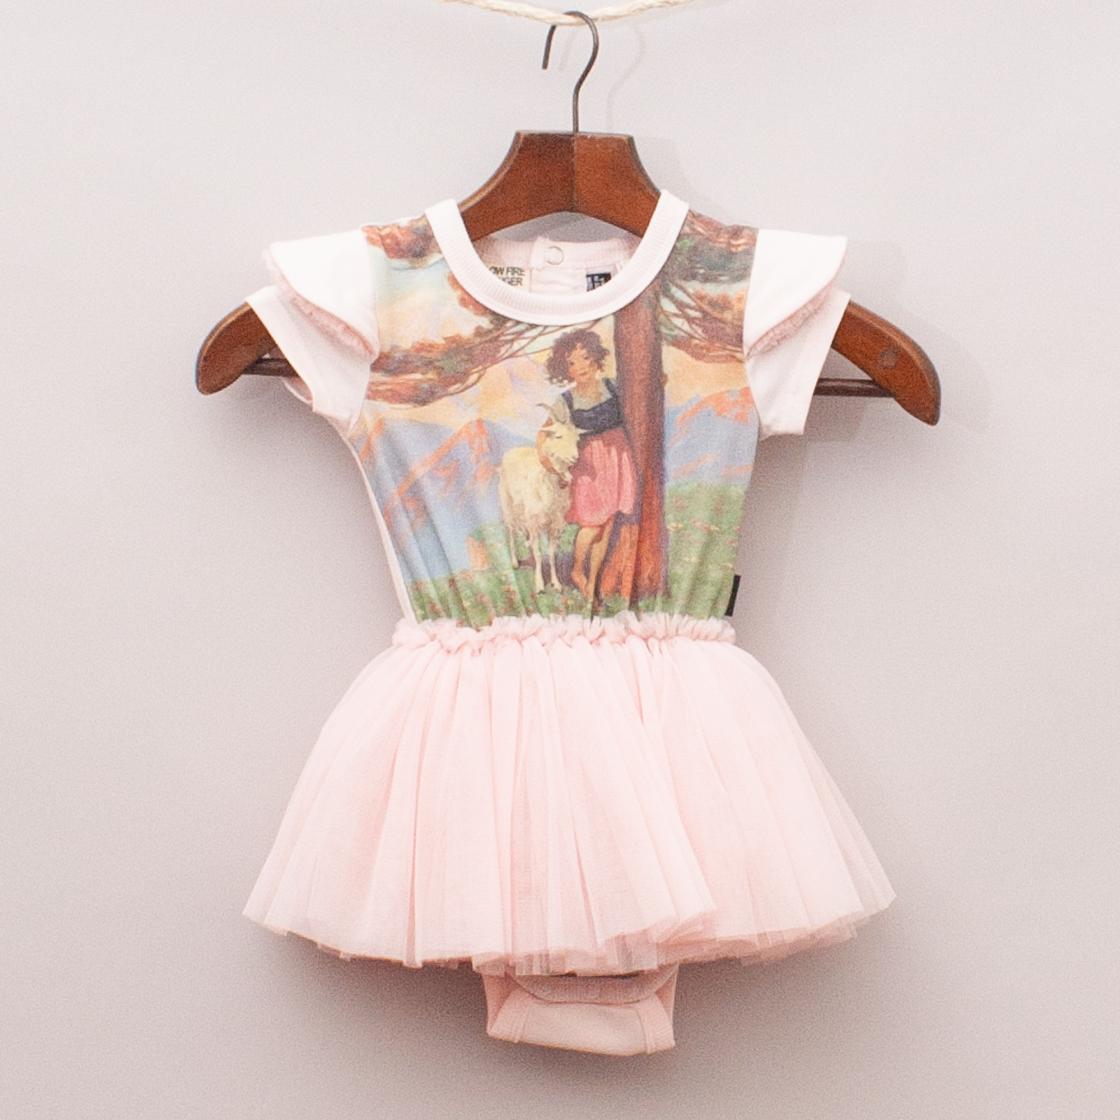 Rock Your Baby Tulle Dress "Brand New"